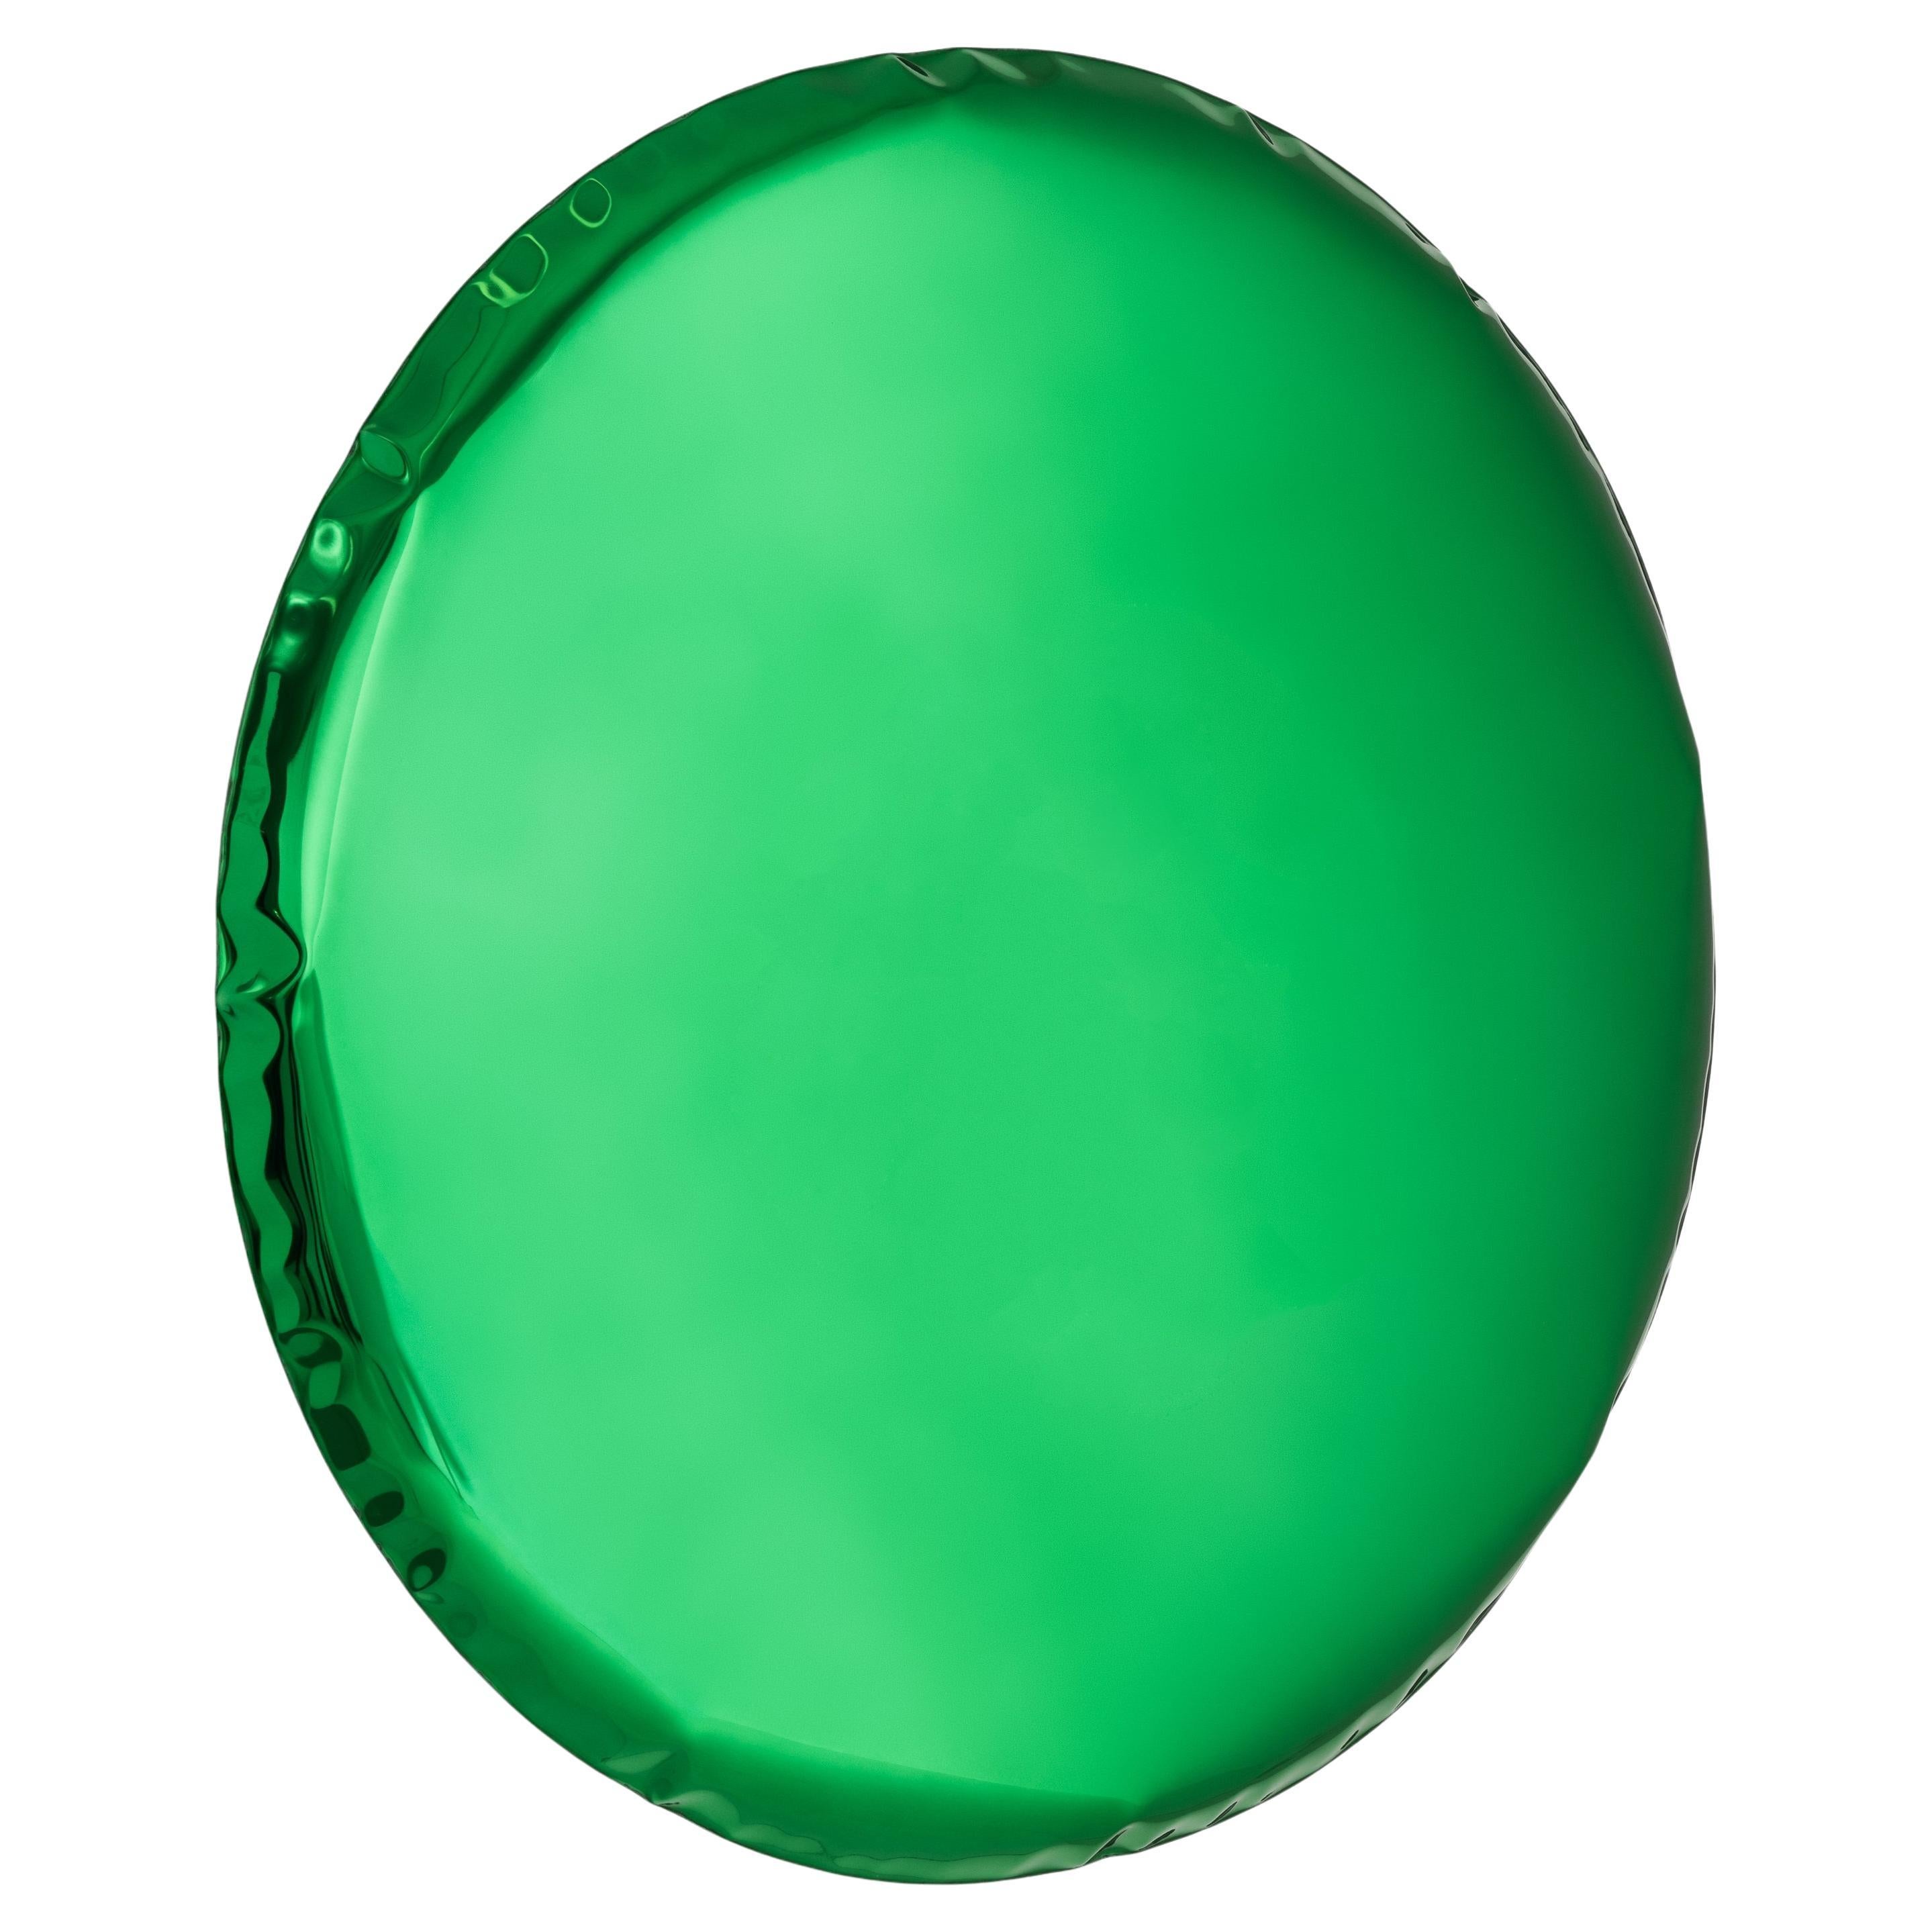 Round Mirror 'Oko 75' in Stainless Steel by Zieta, Emerald For Sale